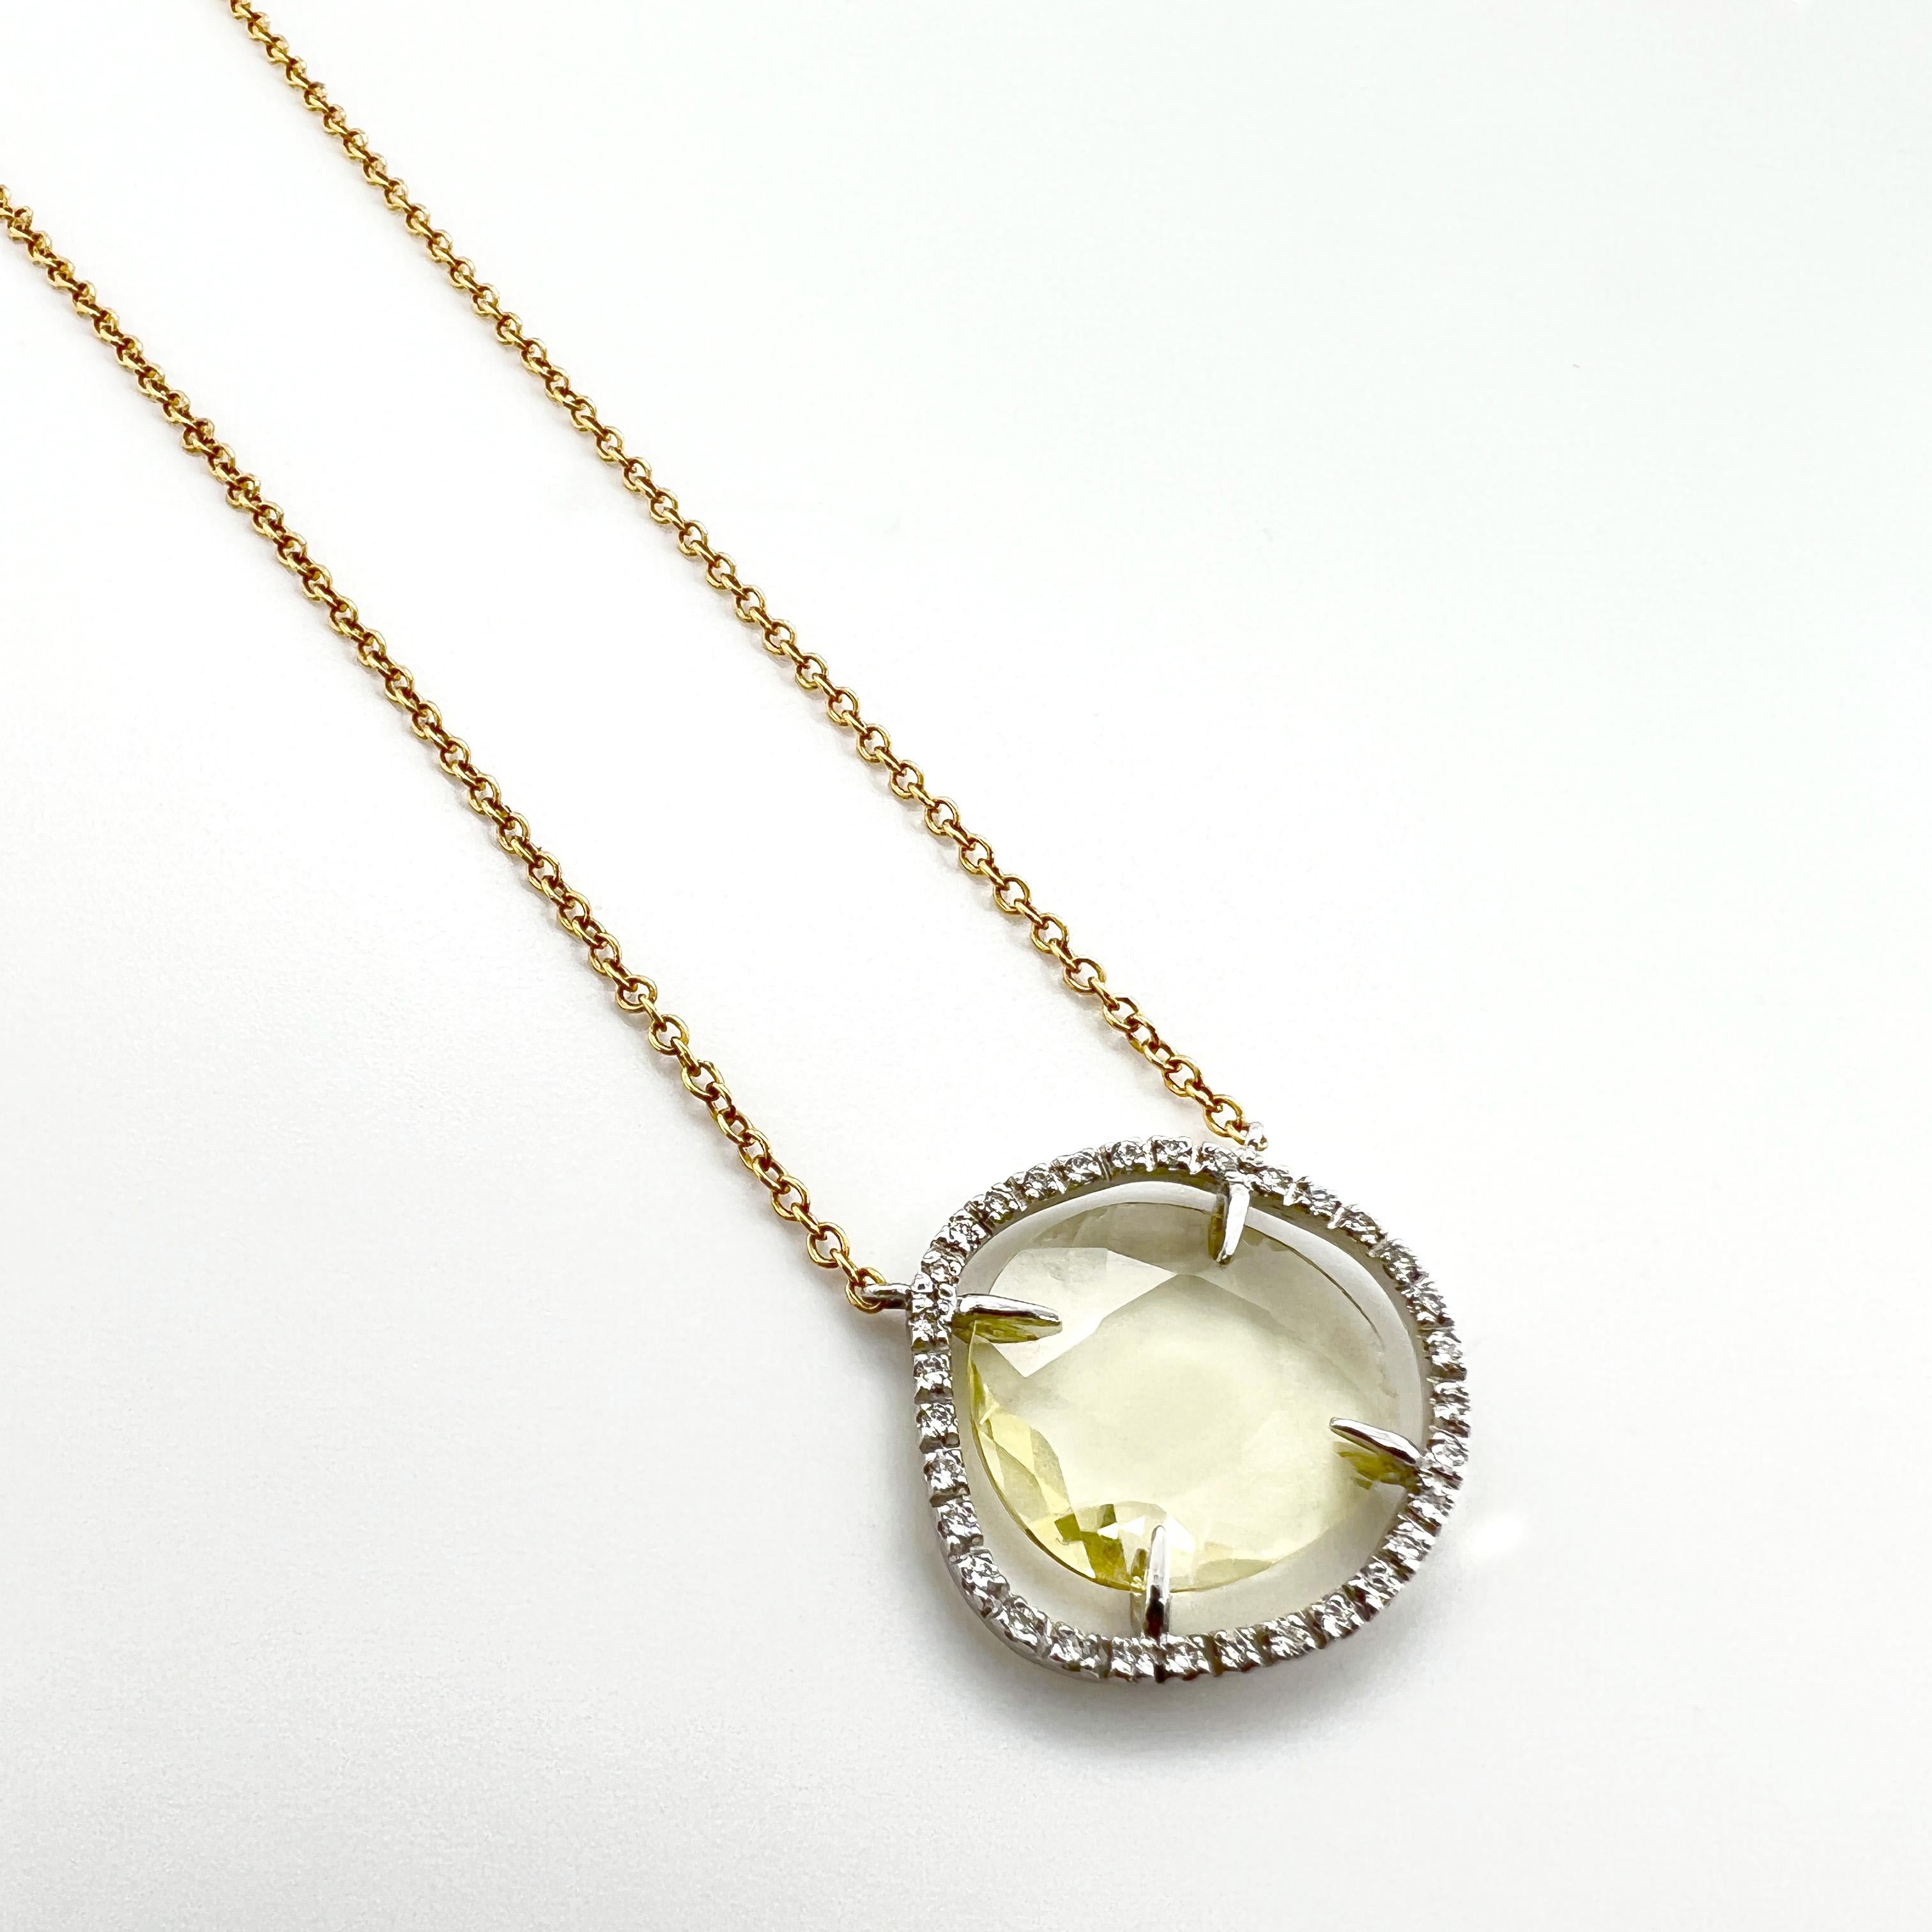 This necklace is a stunning piece crafted with 18kt yellow gold, featuring a central motif of lemon quartz and diamonds. The light lemon quartz, with its yellow hue, is the focal point of the necklace, exuding a sense of warmth and brightness.